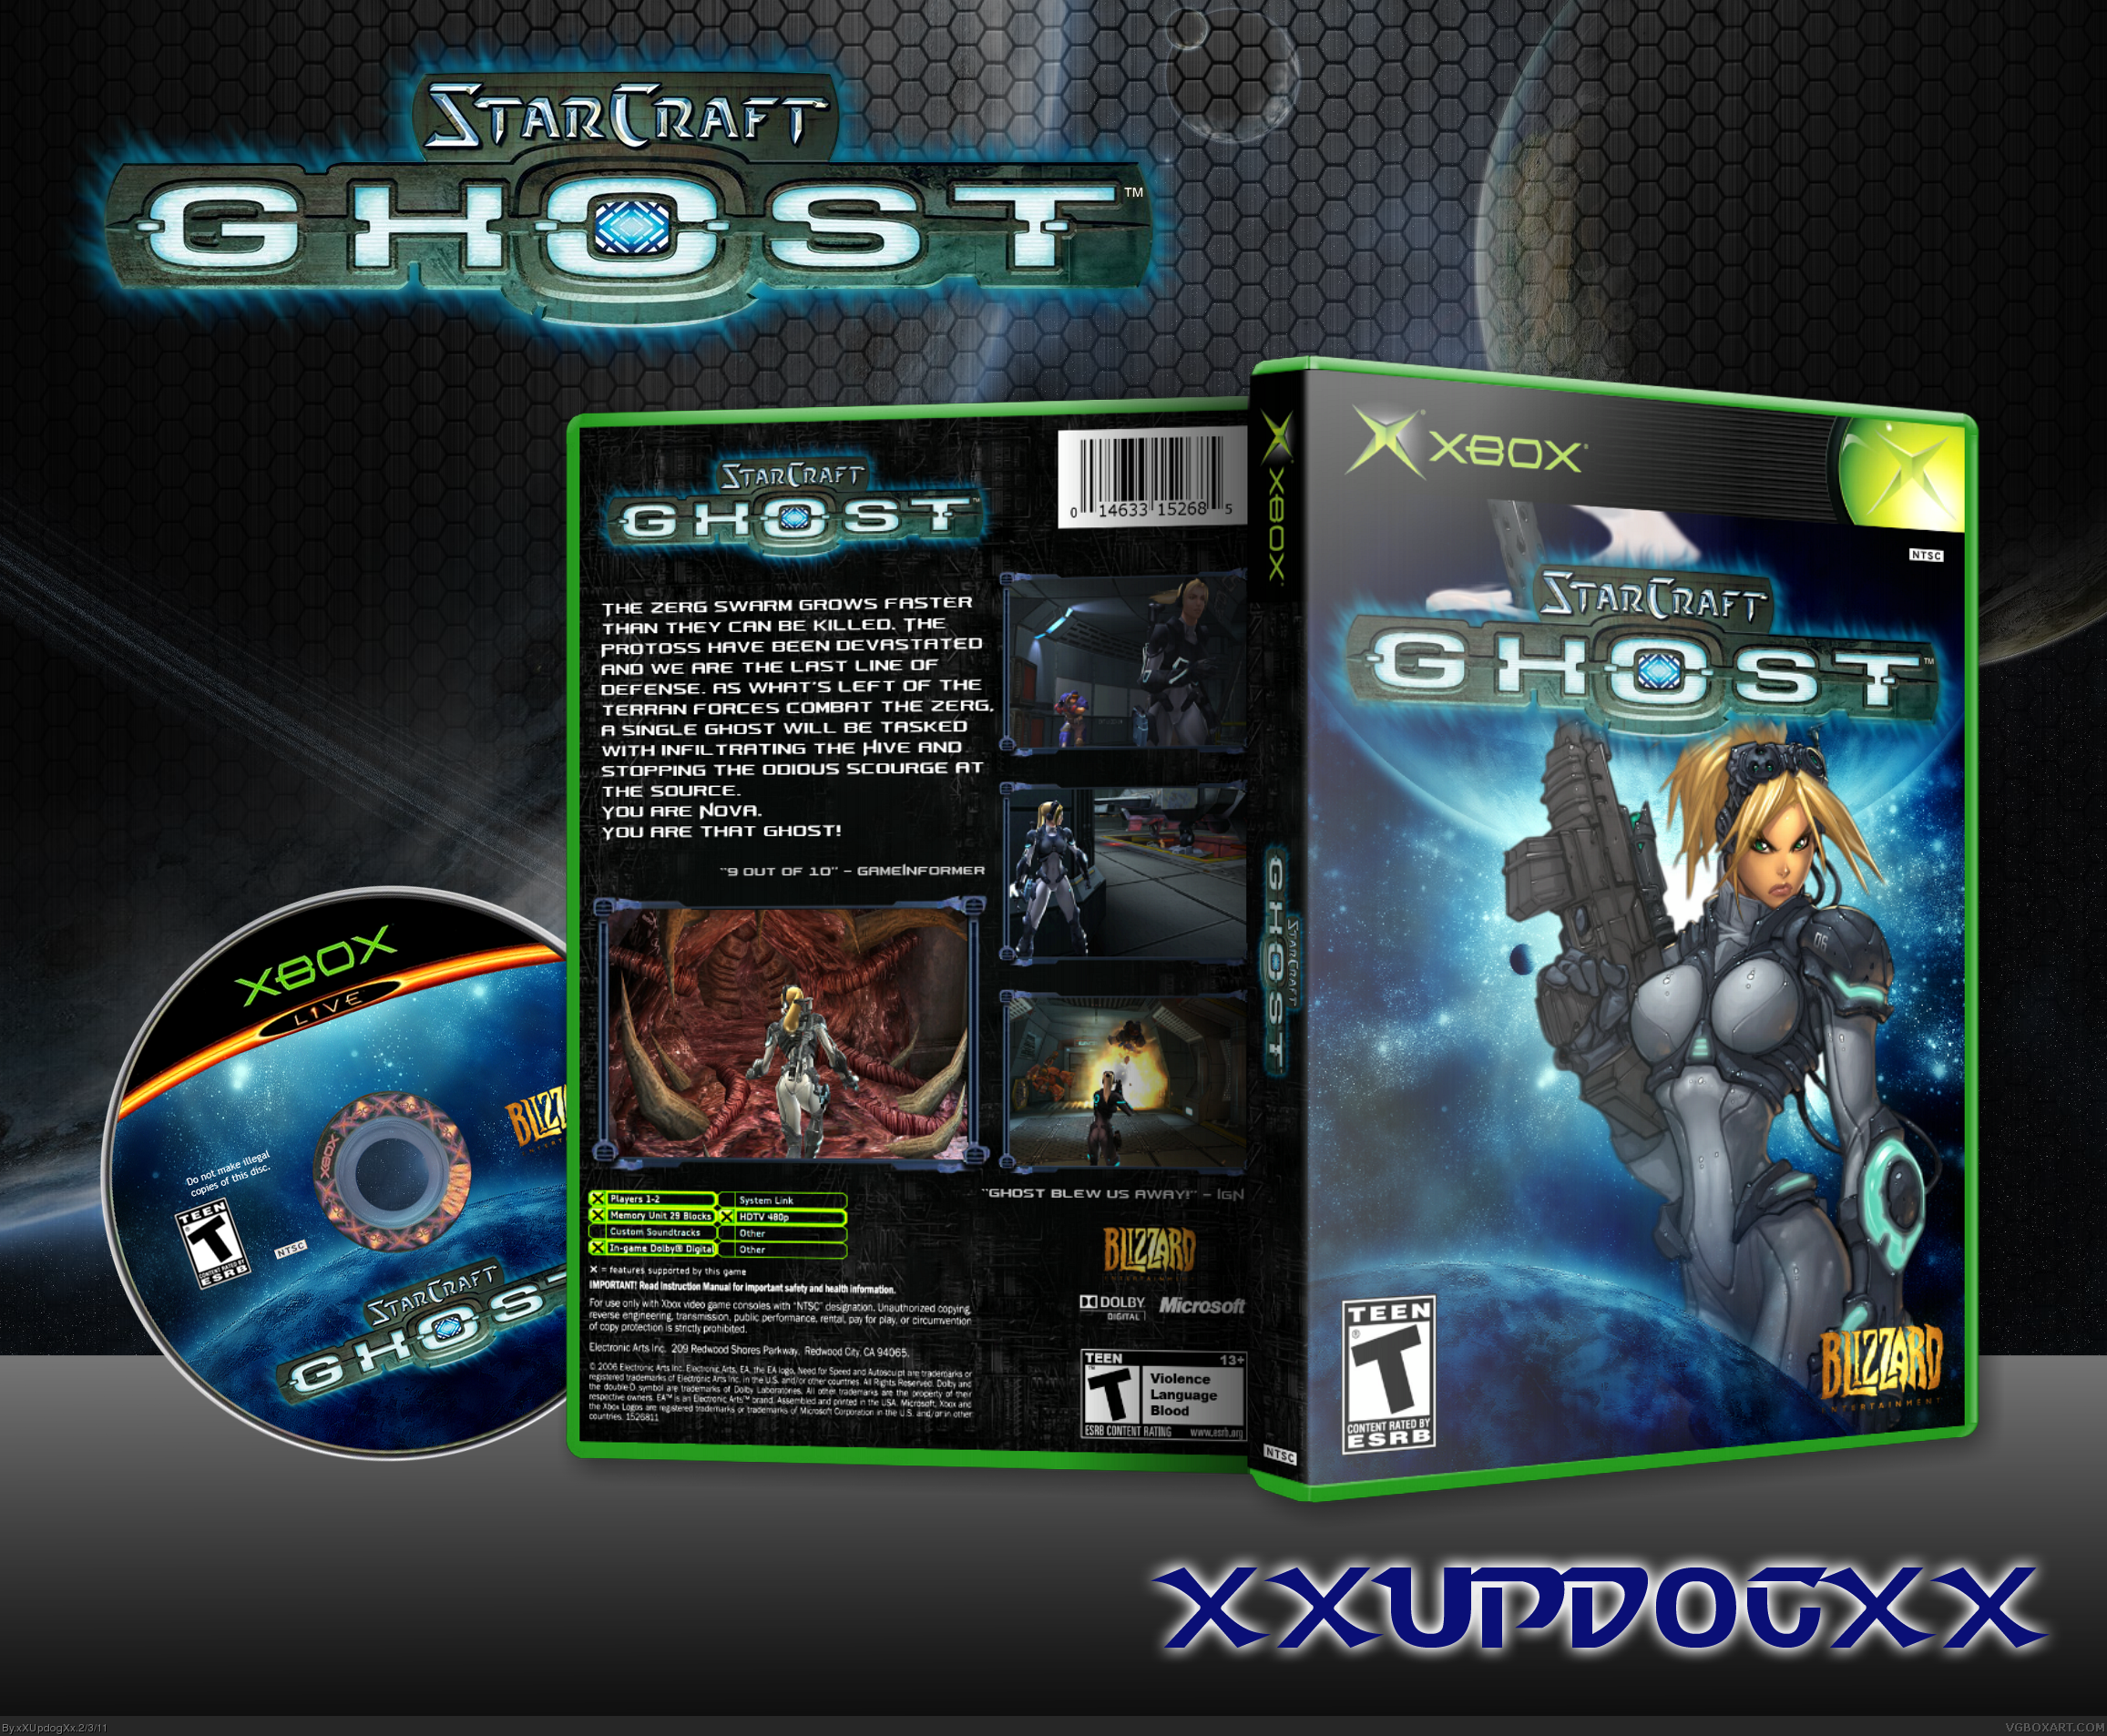 Starcraft: Ghost box cover